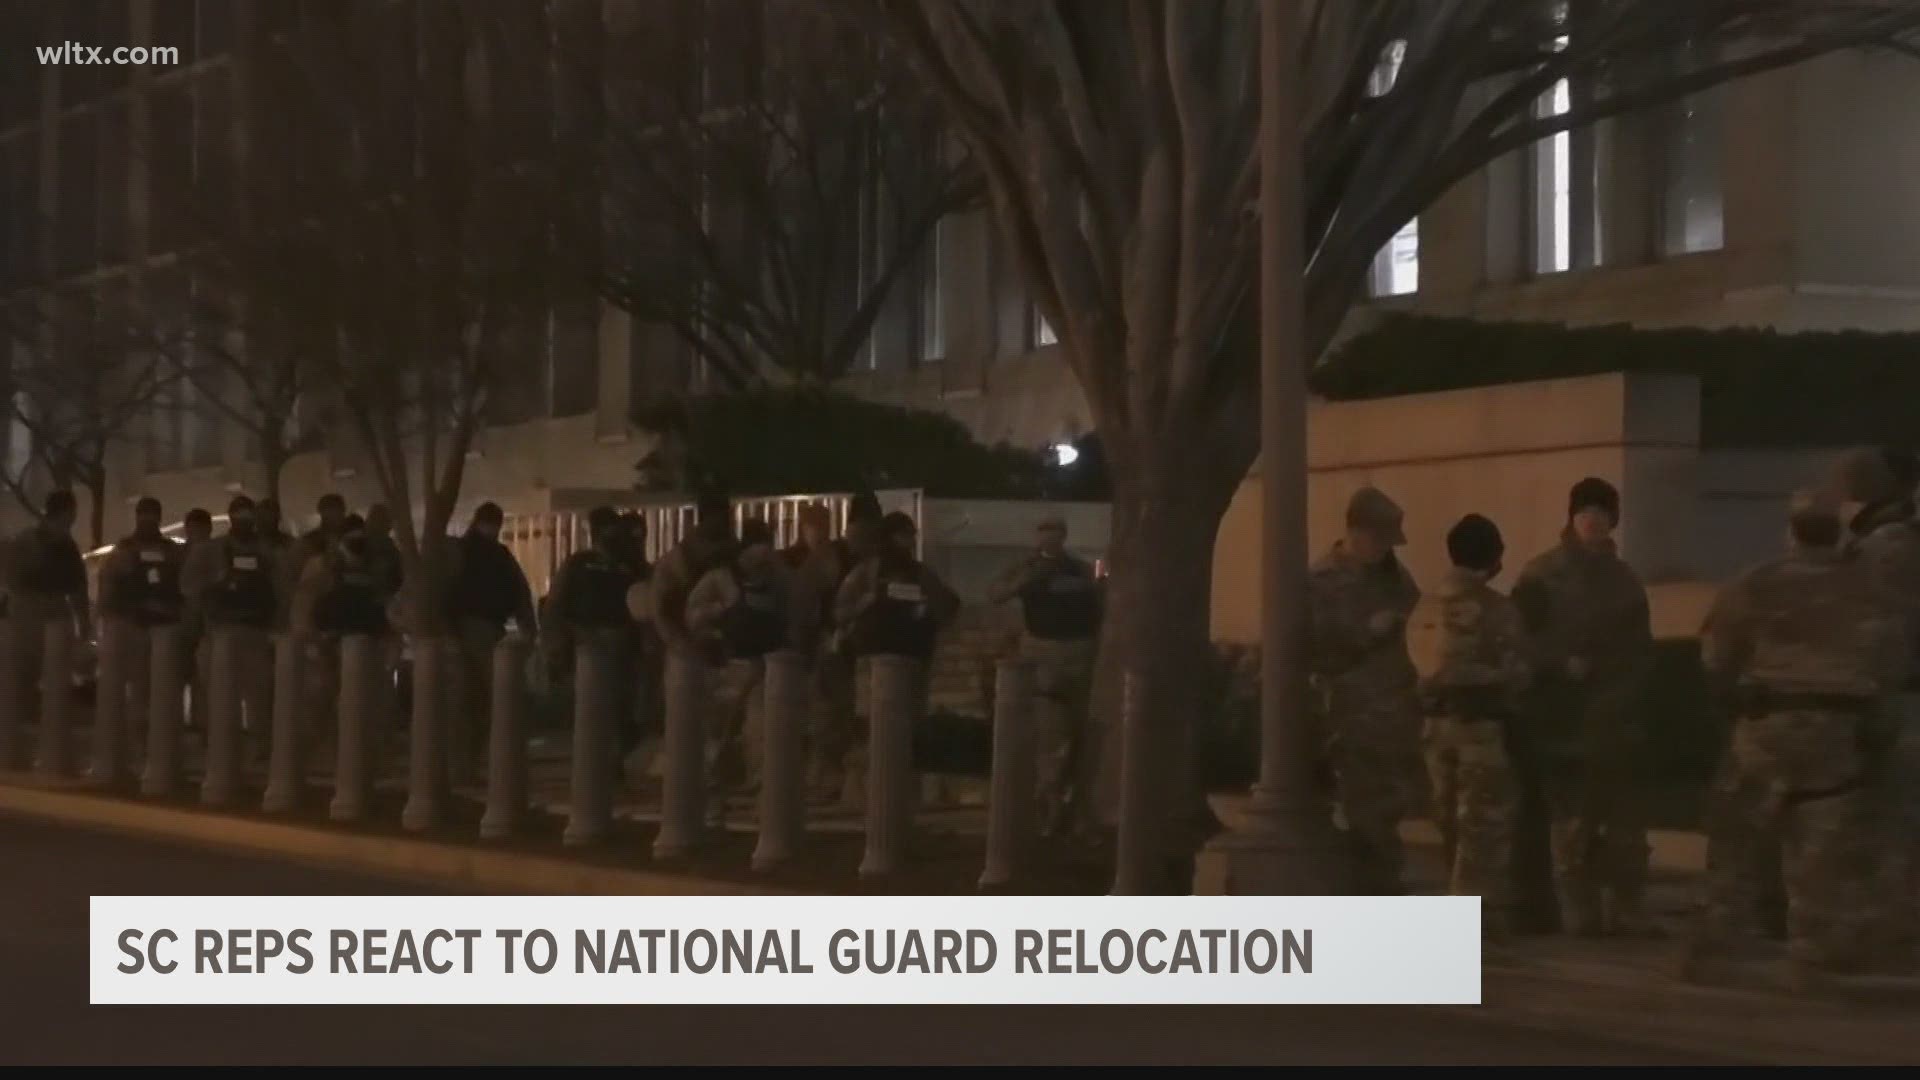 Thursday night, National Guards members were asked to leave the Capitol and were relocated to a parking garage to rest.